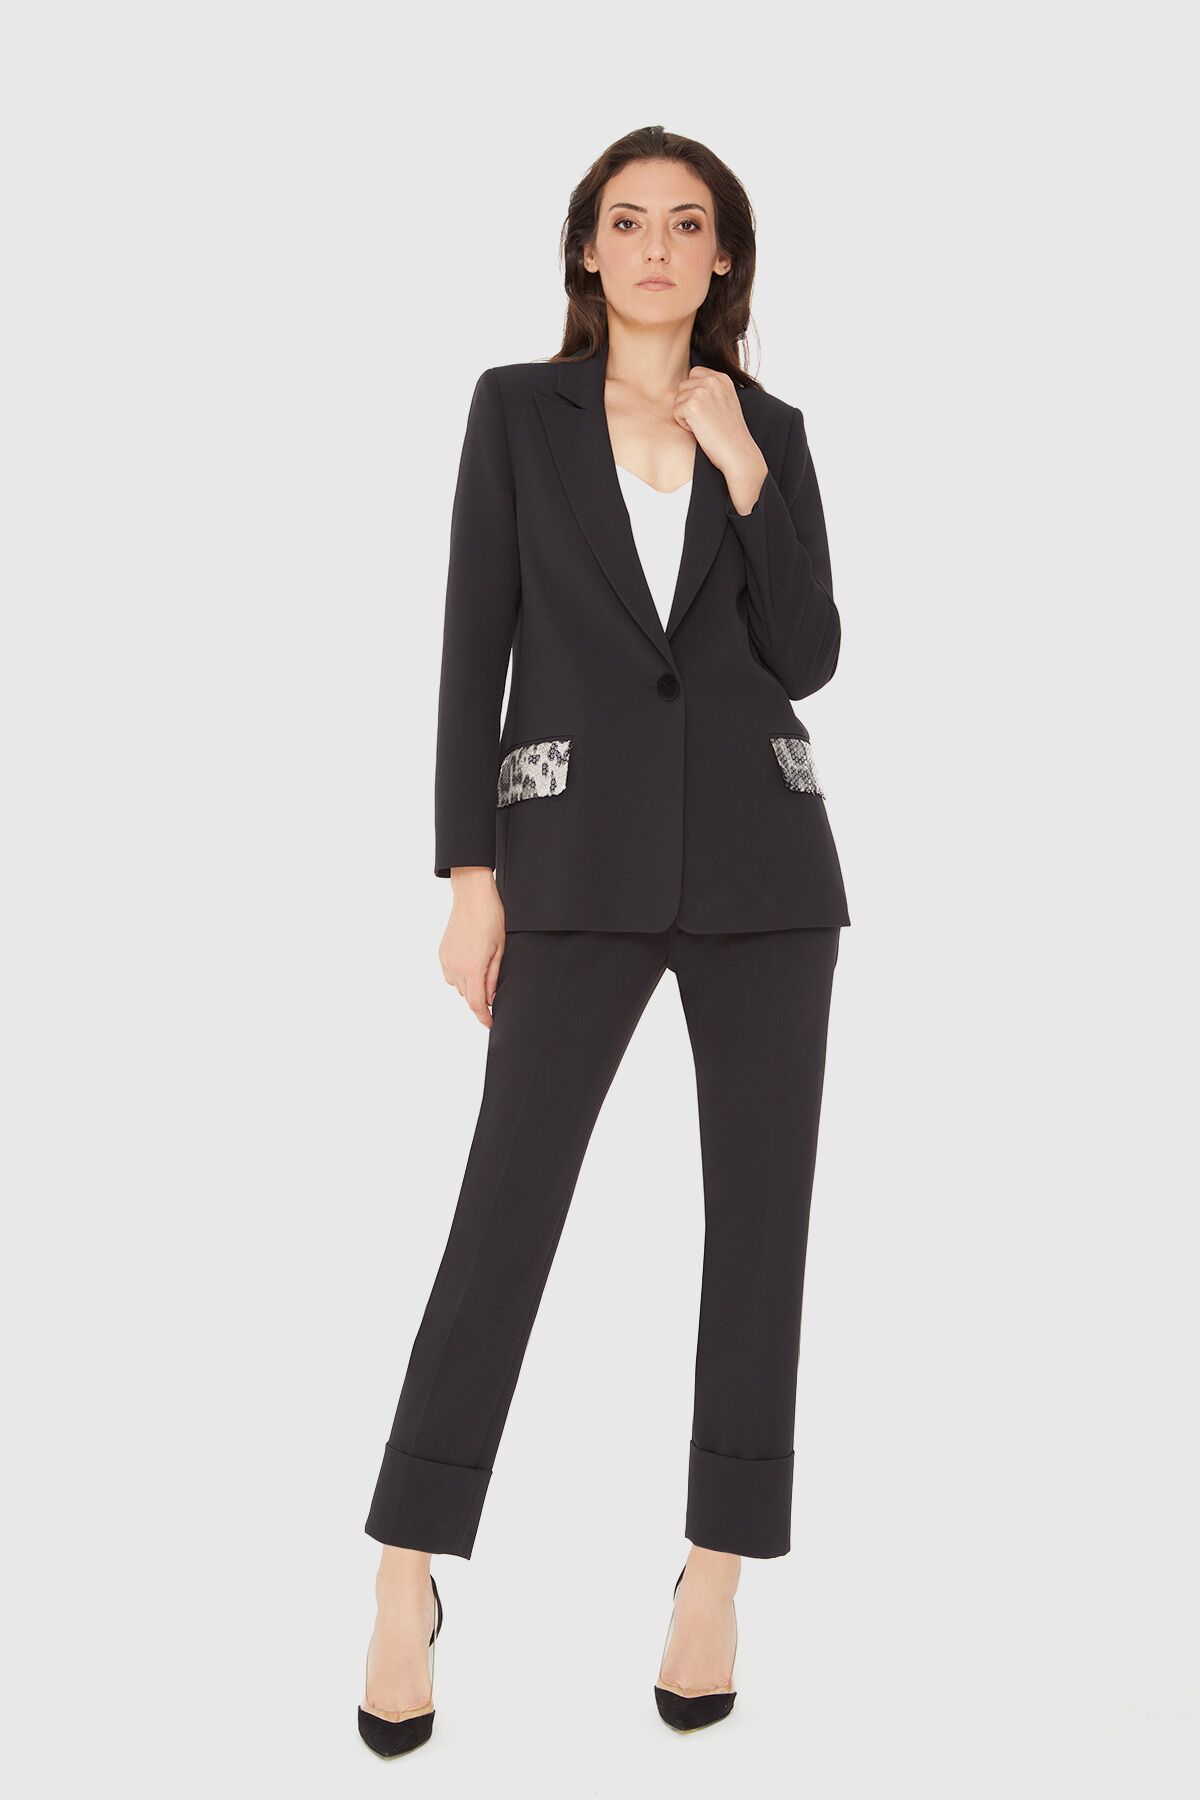 4G CLASSIC - Leopard Sequin Pocket Covered Black Suit With Carrot Pants